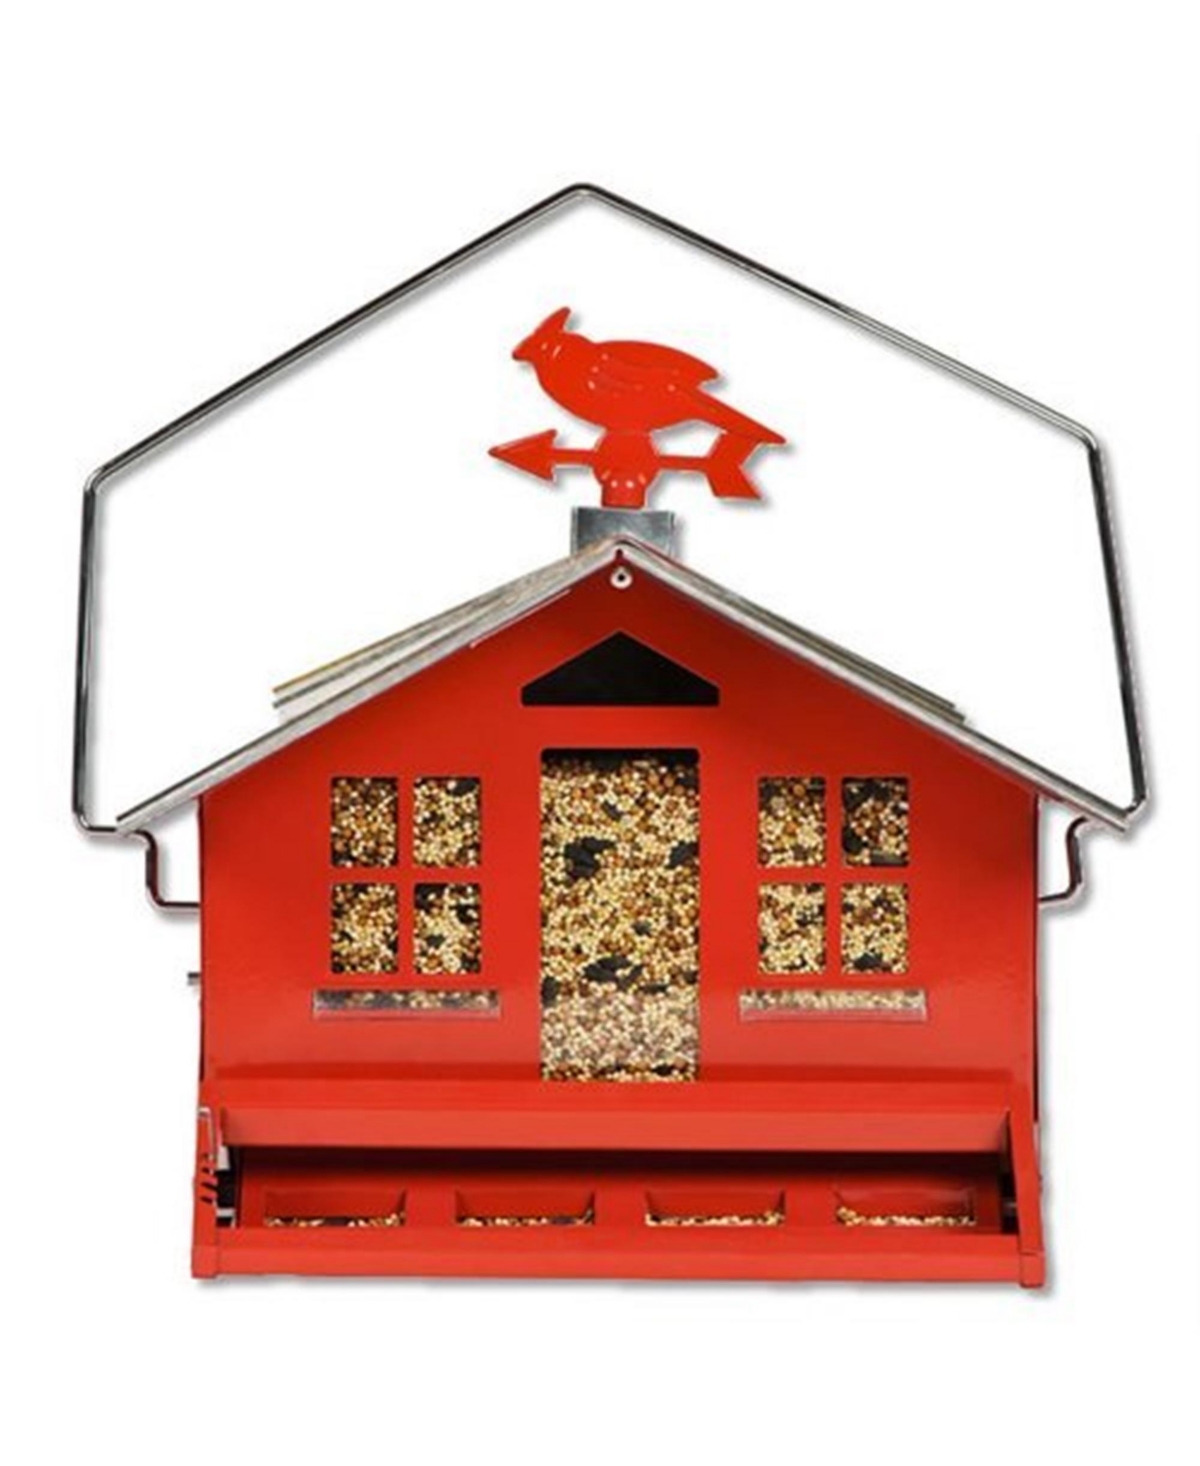 Perky Pet Squirrel Be Gone Country Style Bird Feeder - Multi